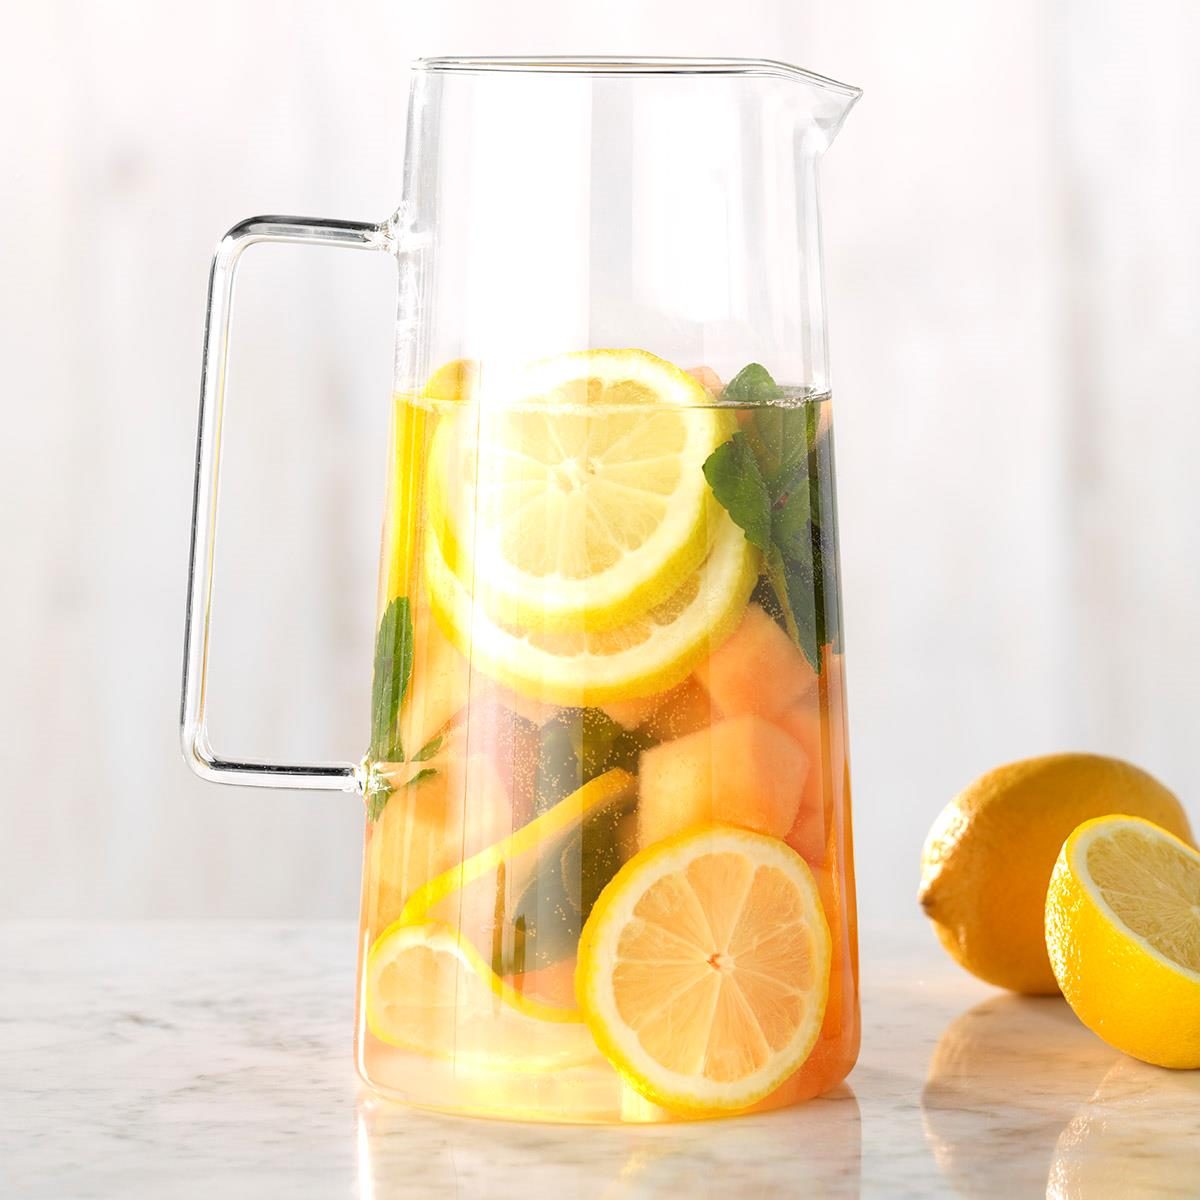 Cantaloupe, Mint and Lemon Infused Water